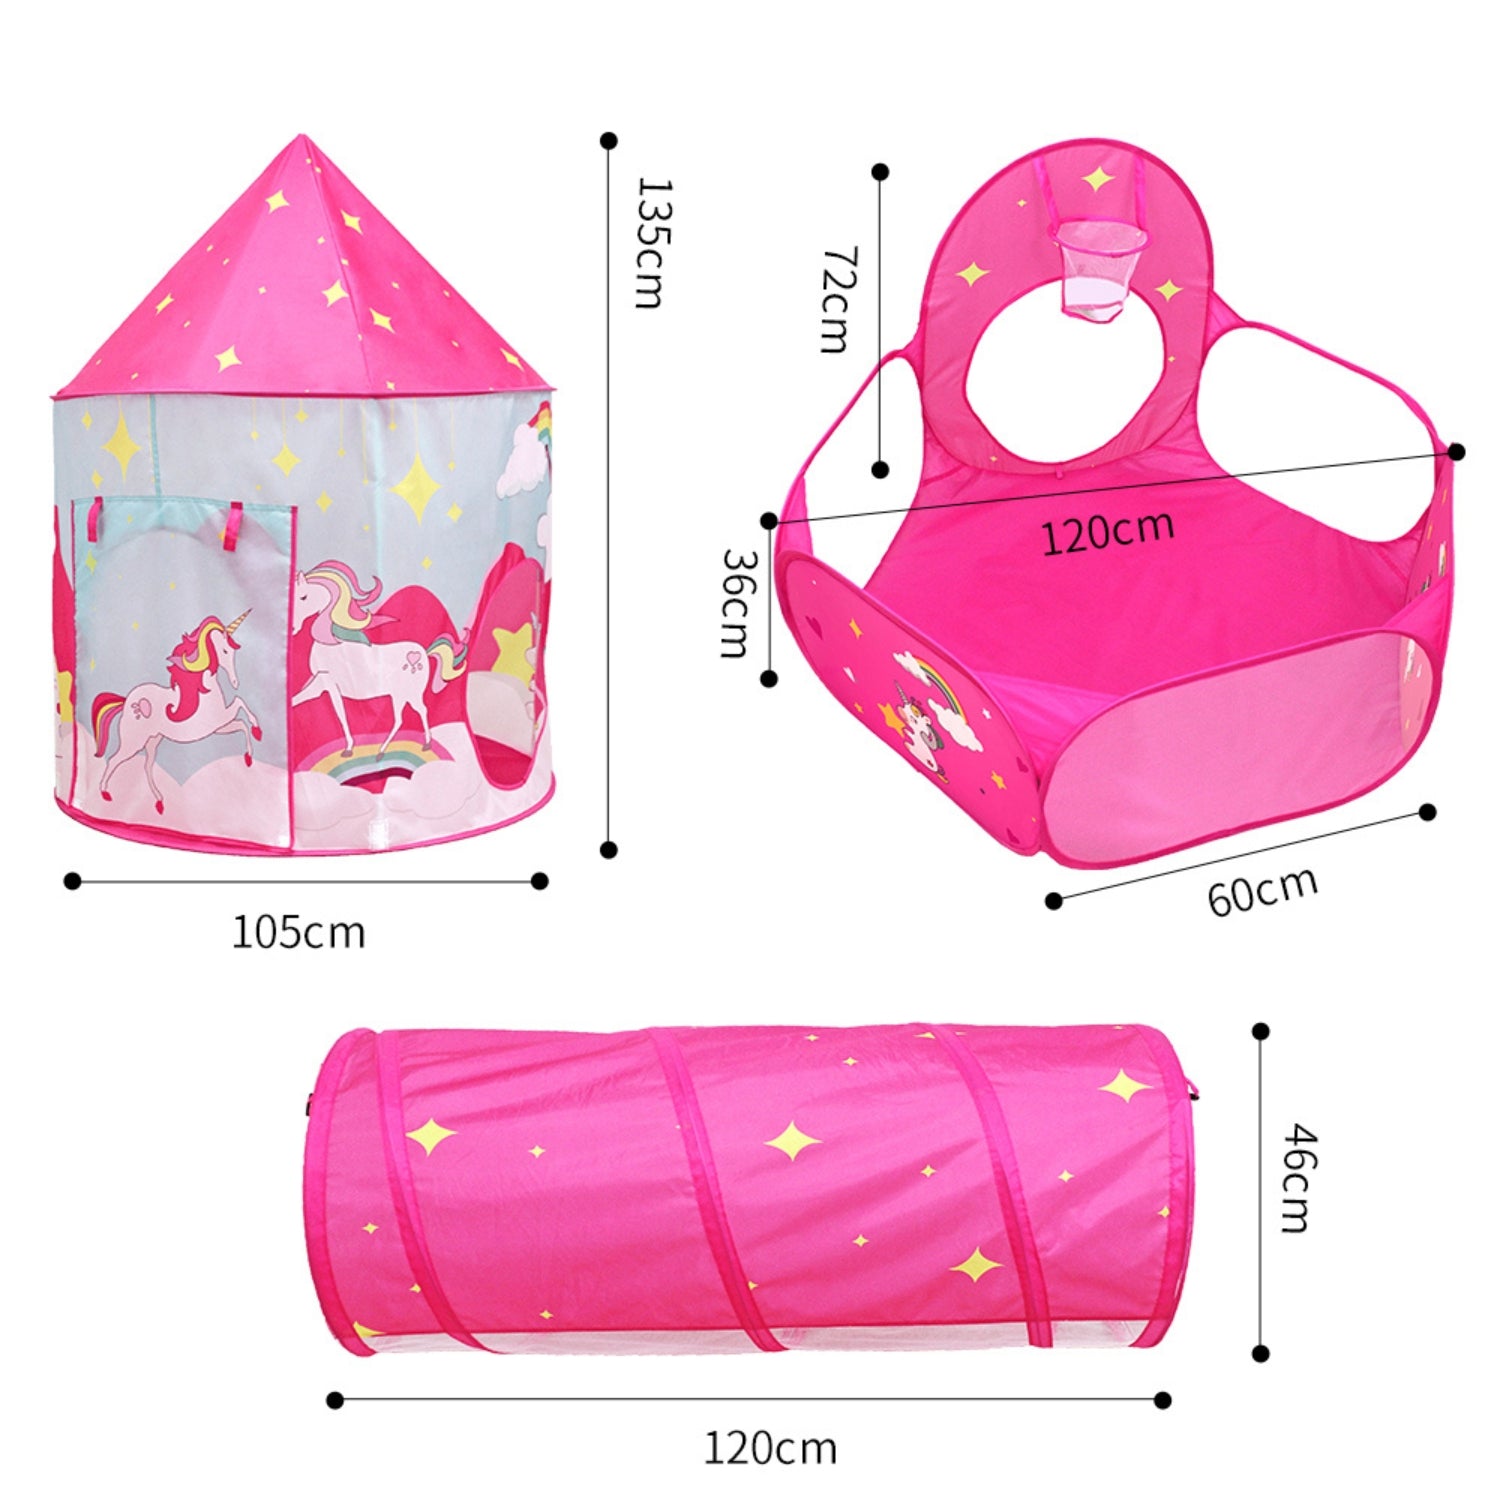 GOMINIMO 3 in 1 Unicorn Style Kids Play Tent (Pink) GO-KT-112-LK